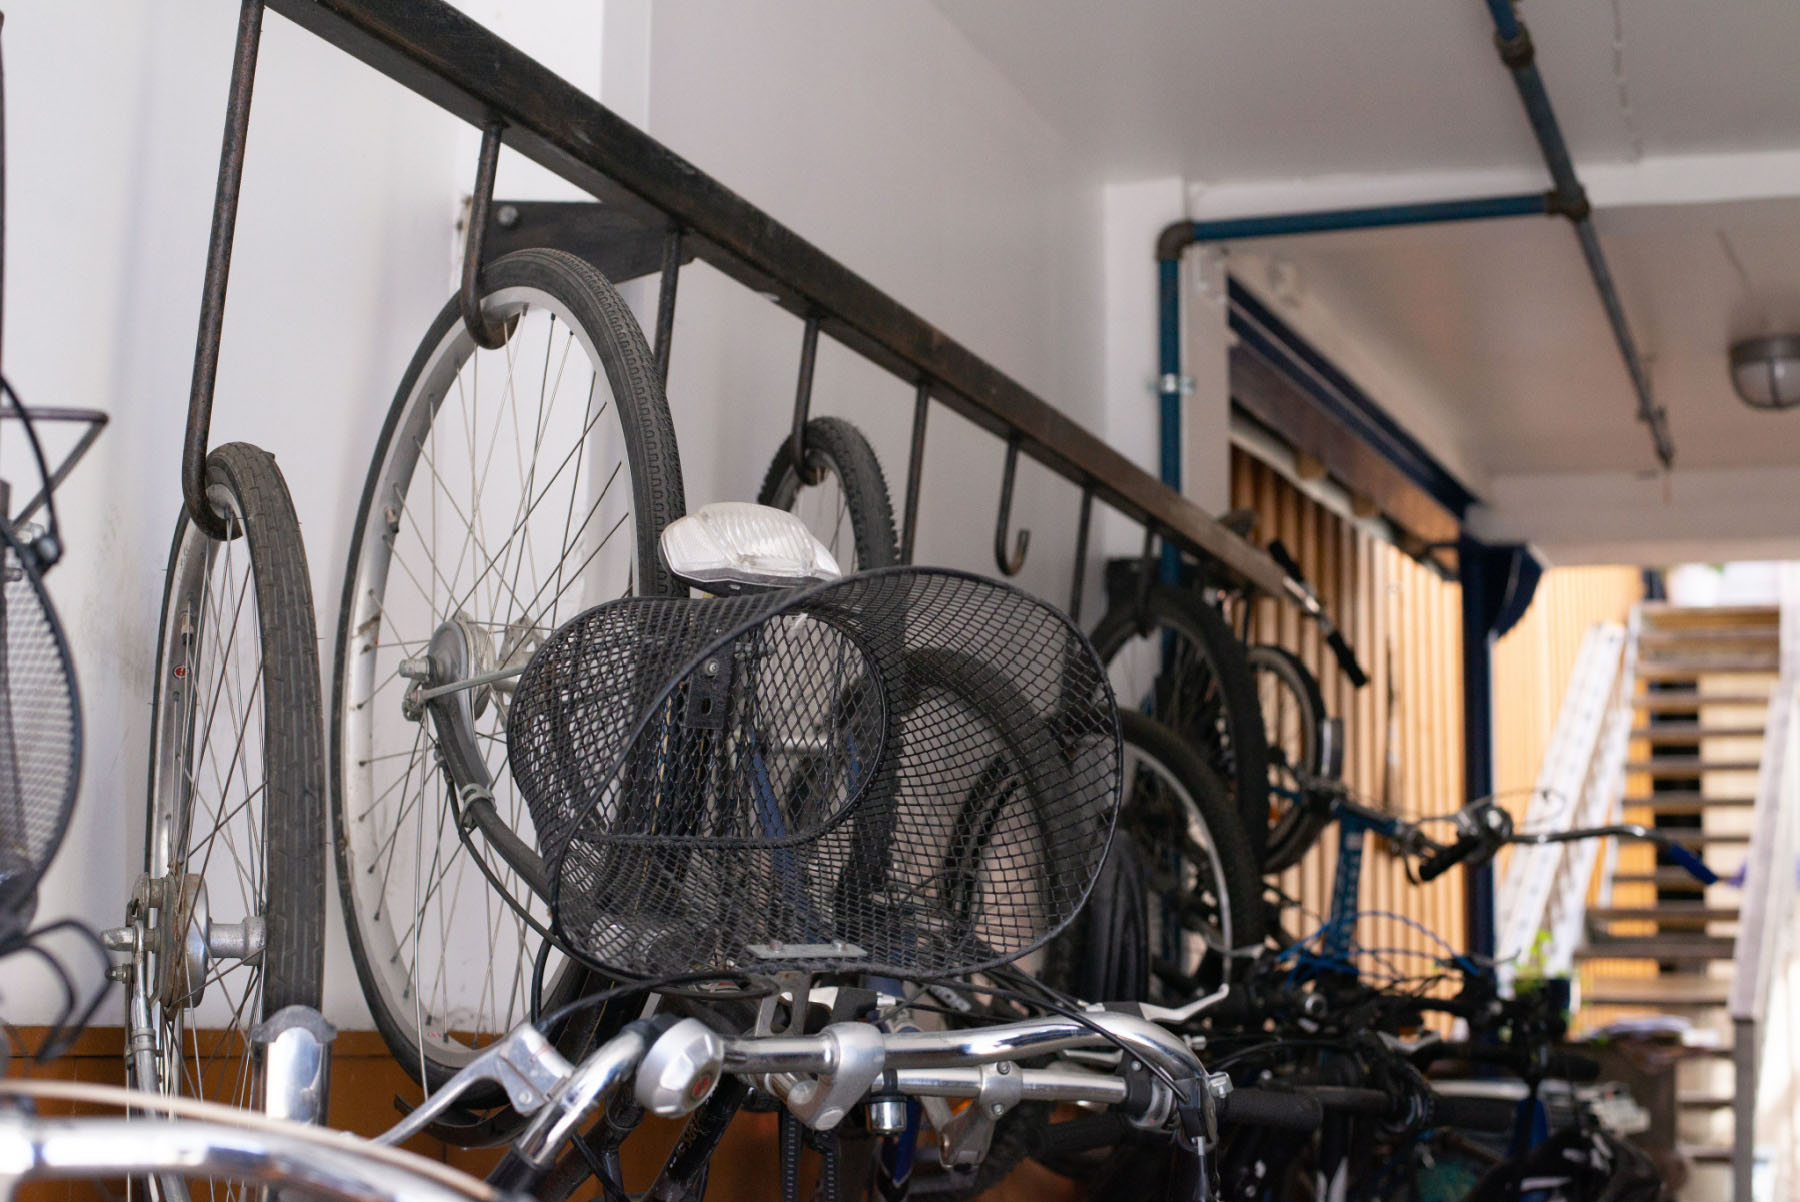 Stored bicycles hung by the front wheel